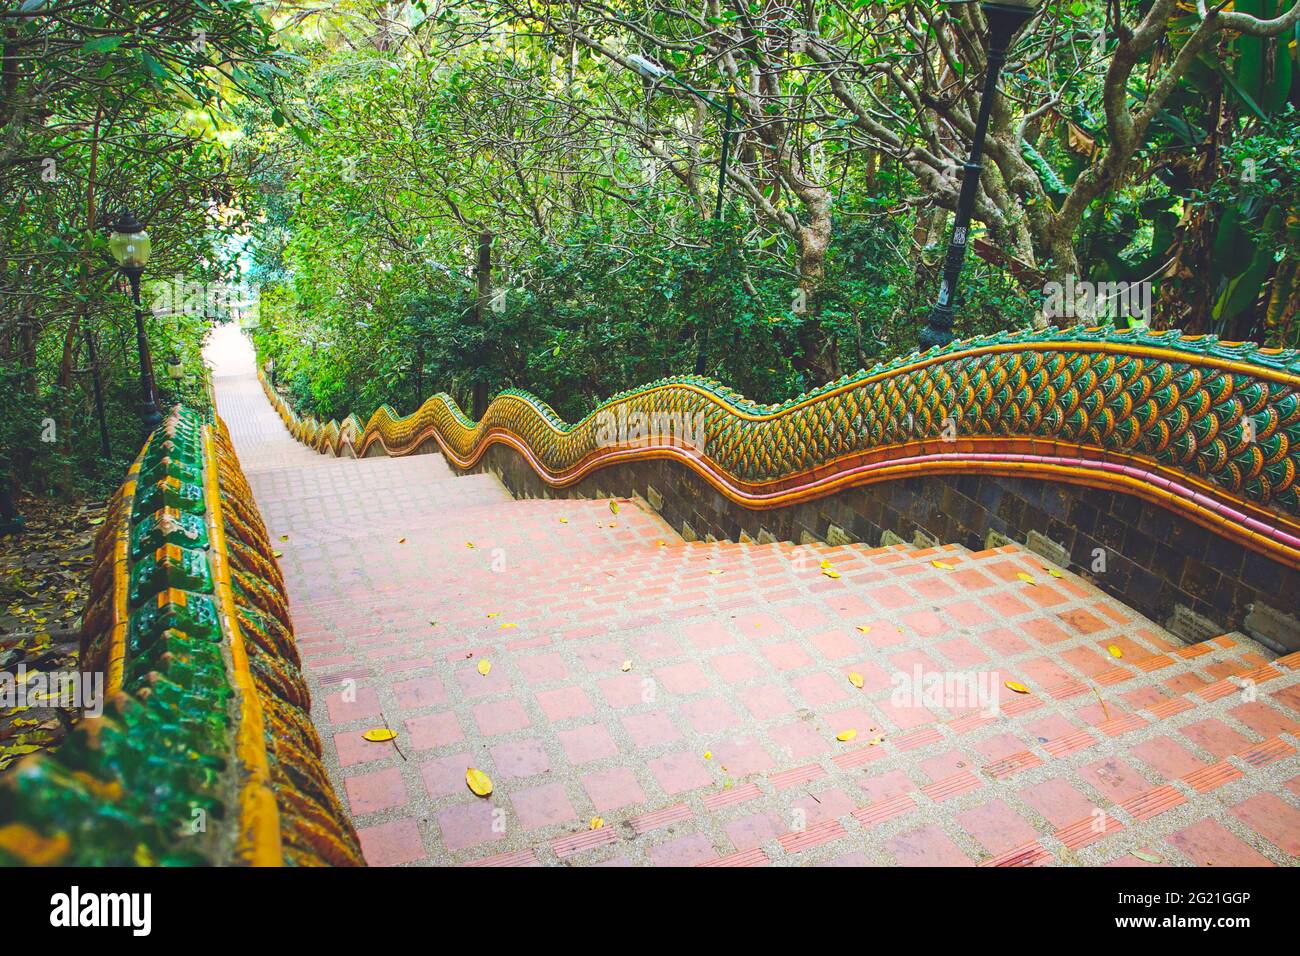 The world famous long Naga stairs 306 steps in Wat Phra That Doi Suthep tempe, Chiang Mai province, Thailand. Stock Photo